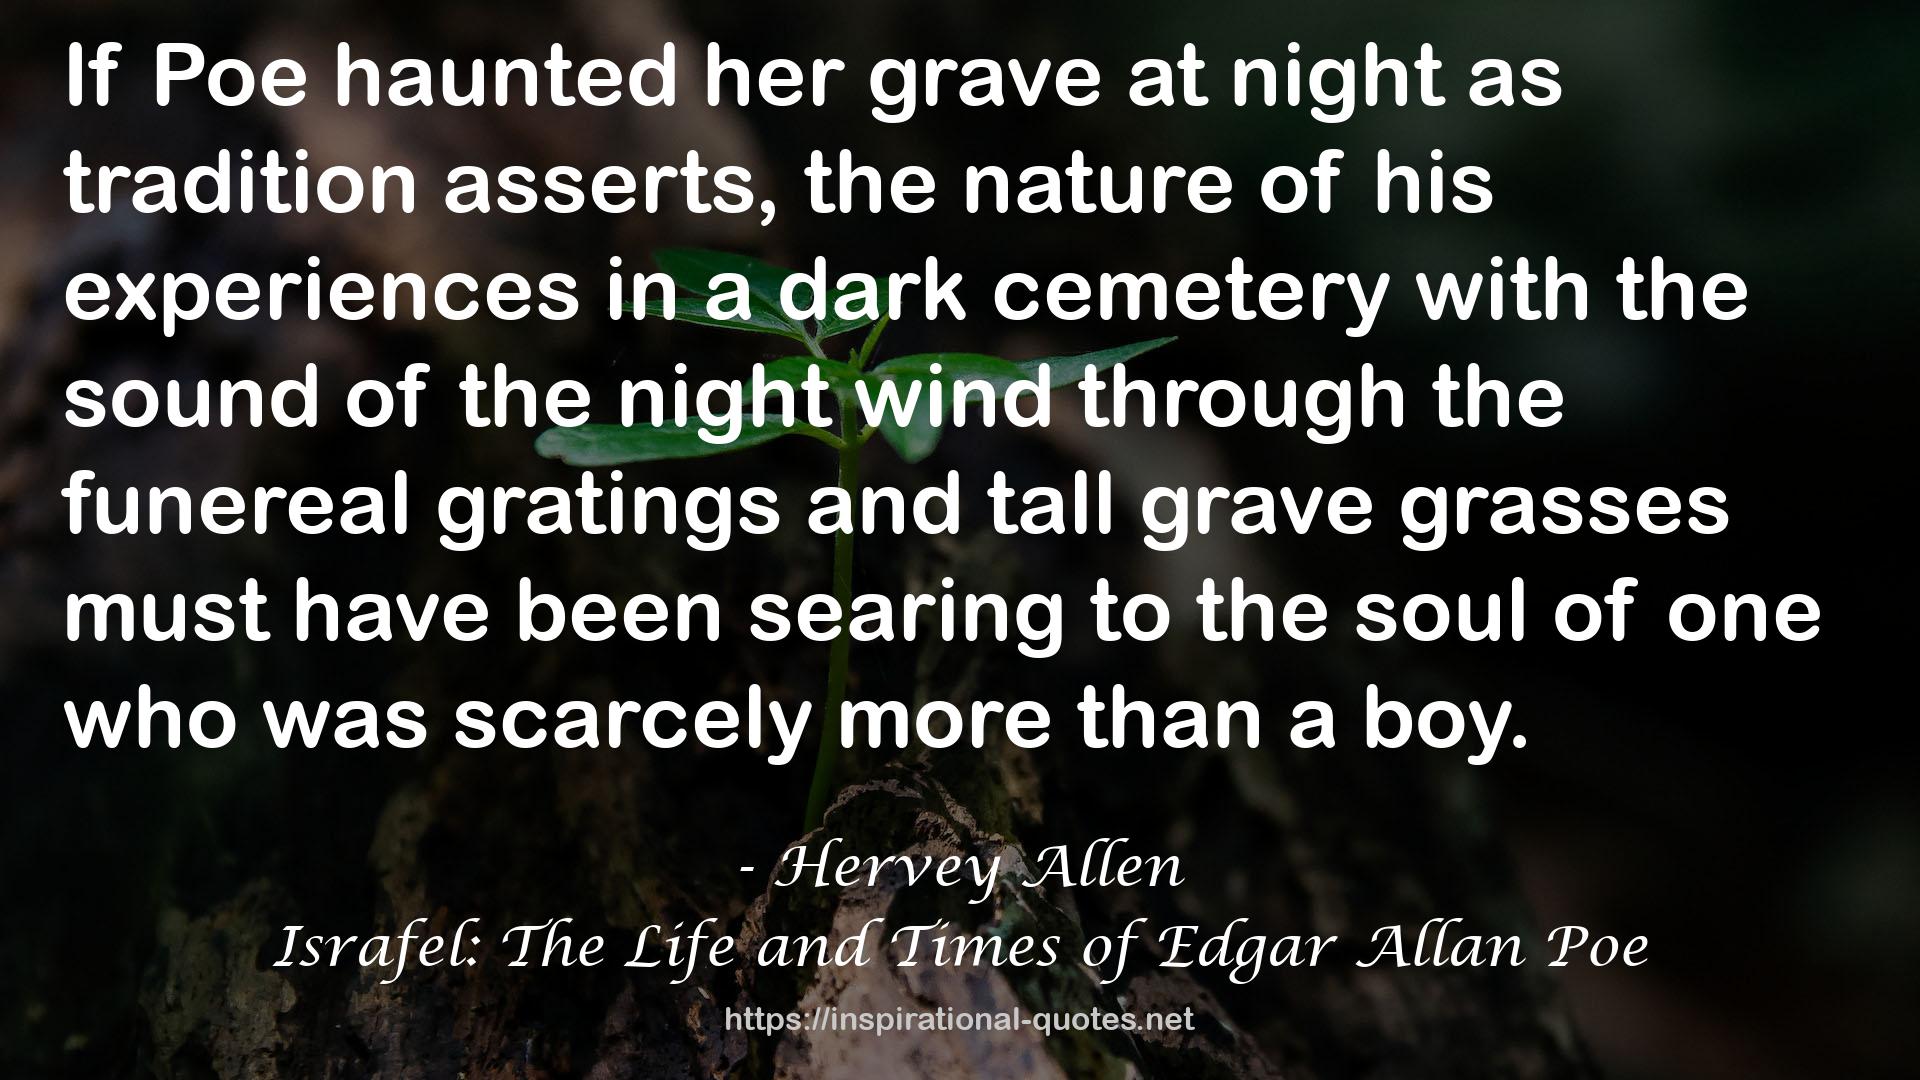 Israfel: The Life and Times of Edgar Allan Poe QUOTES